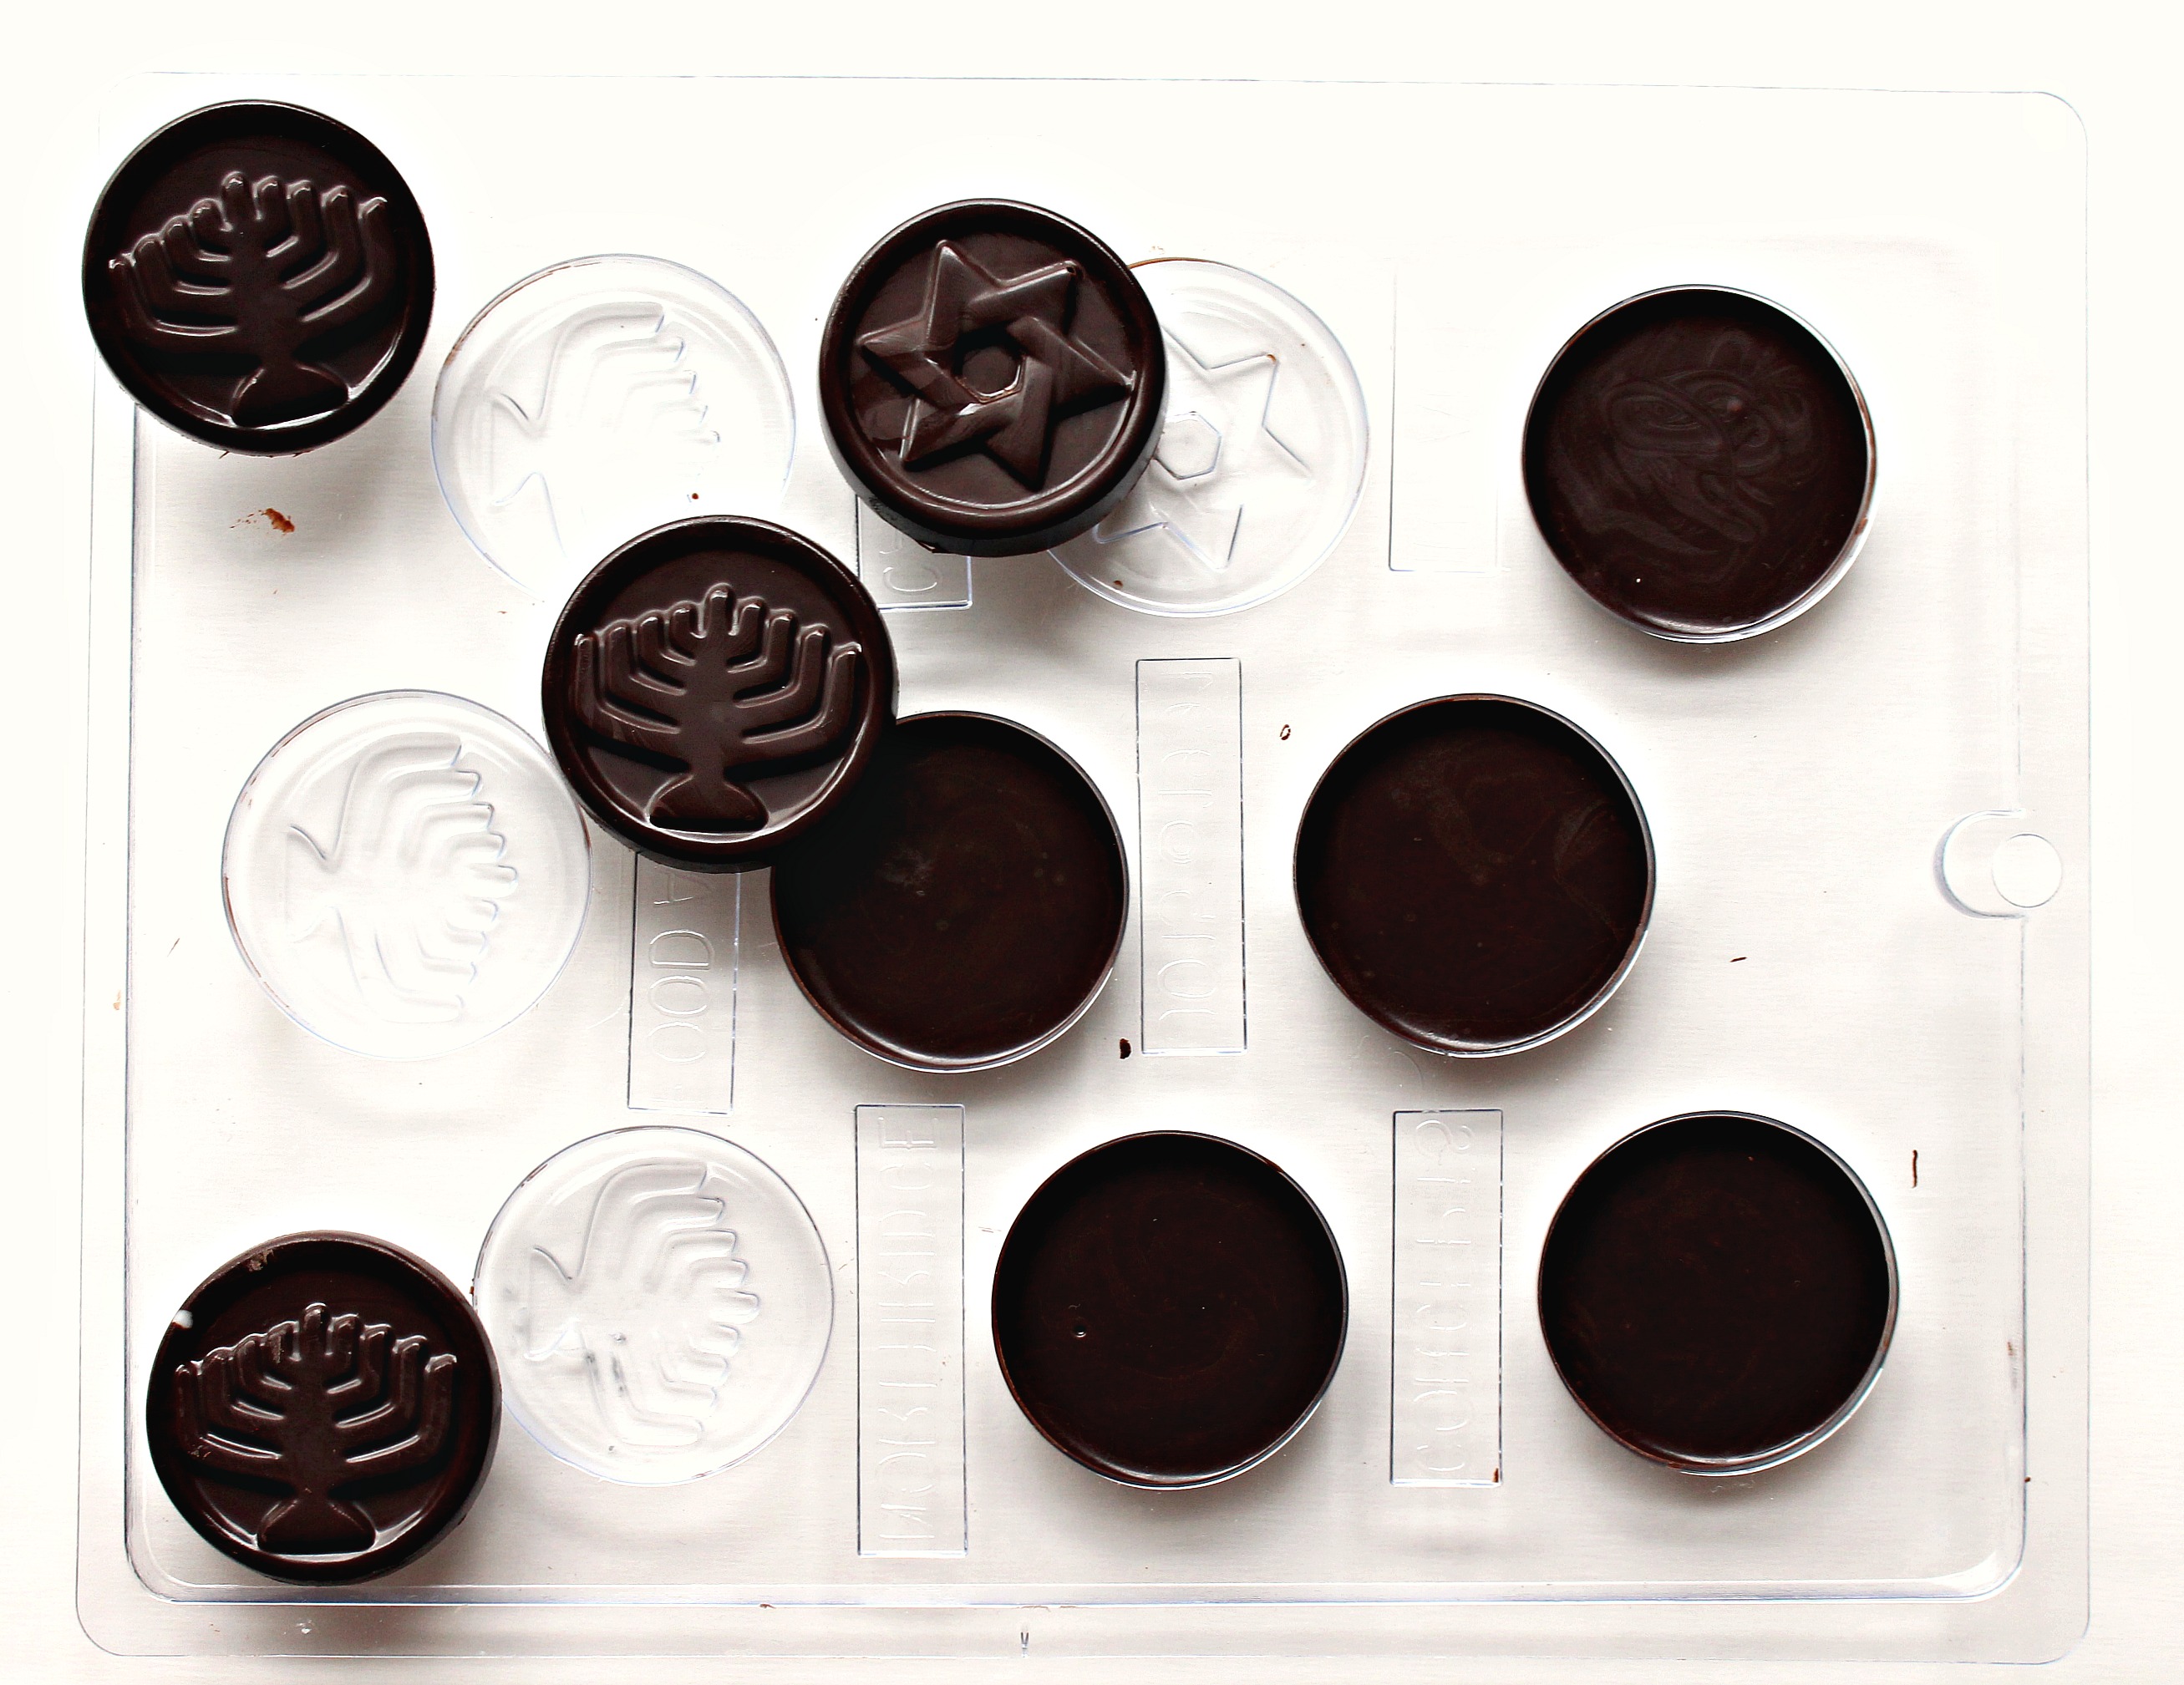 Chocolate discs in a plastic mold